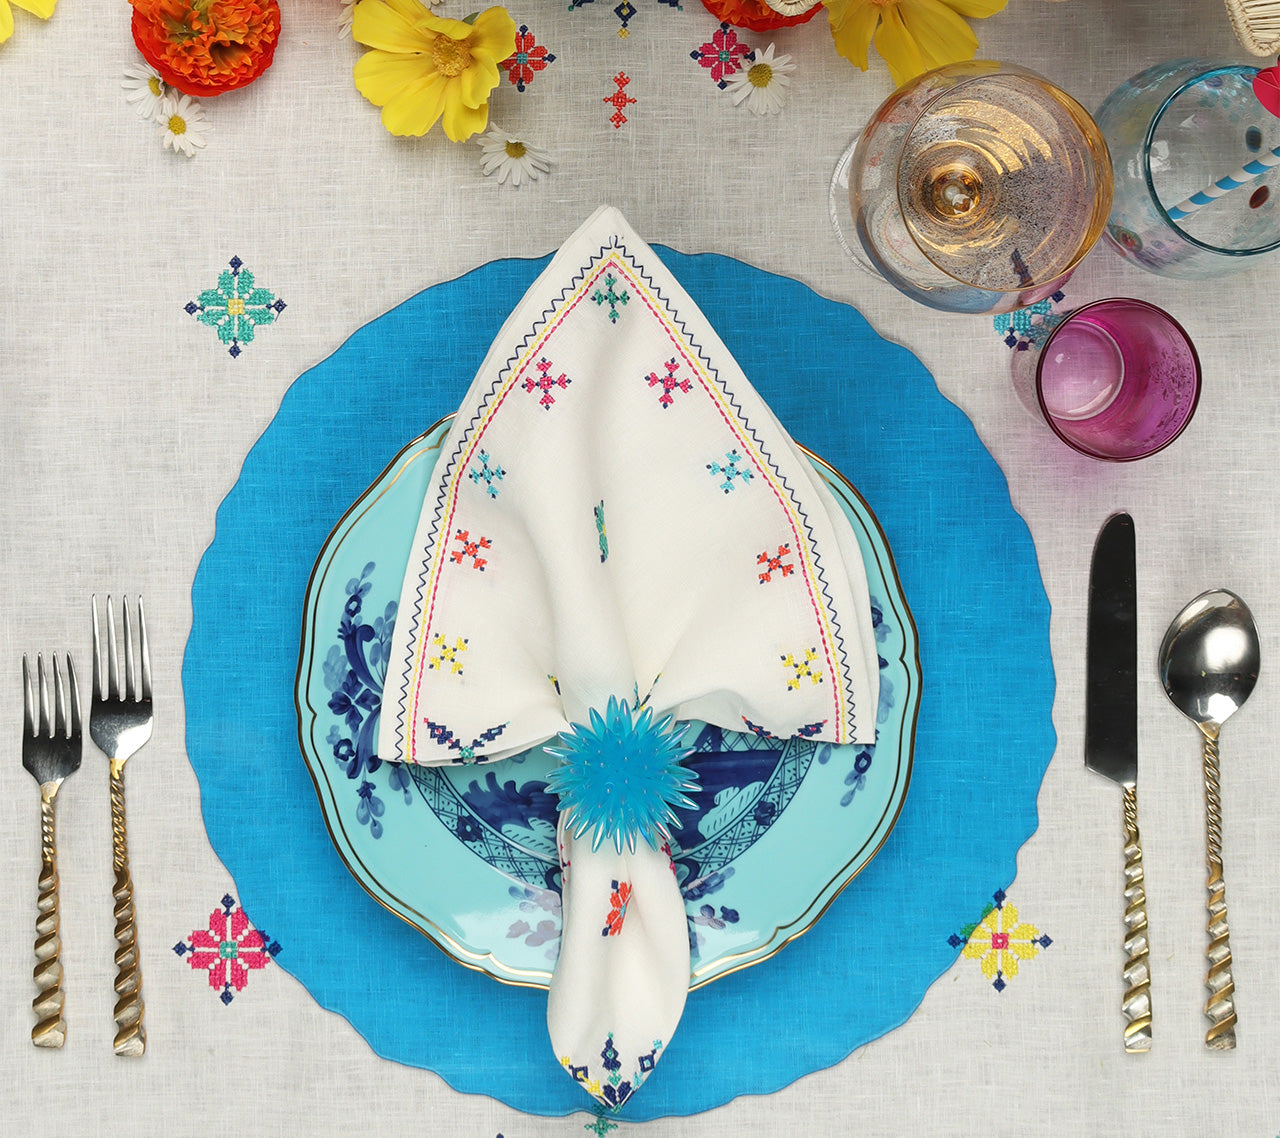 Place setting with a blue placemat and a Kim Seybert Luxury Fez Napkin in white & multi